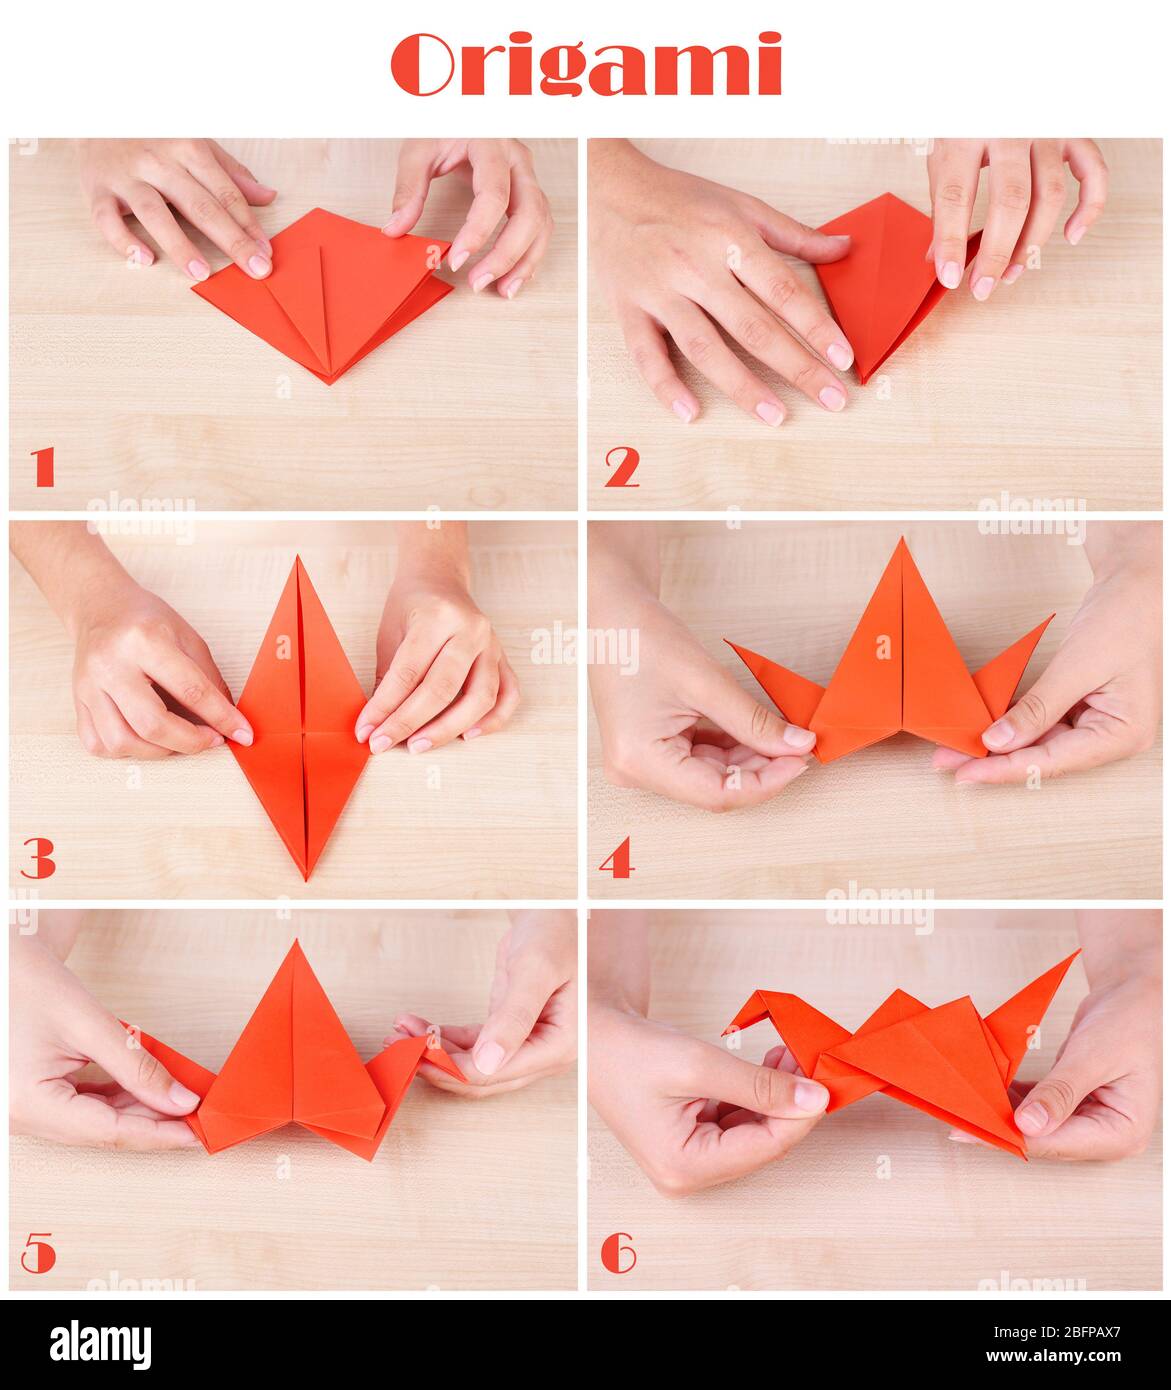 Origami Tutorial Female Hands Folding Paper Crane Hobby And